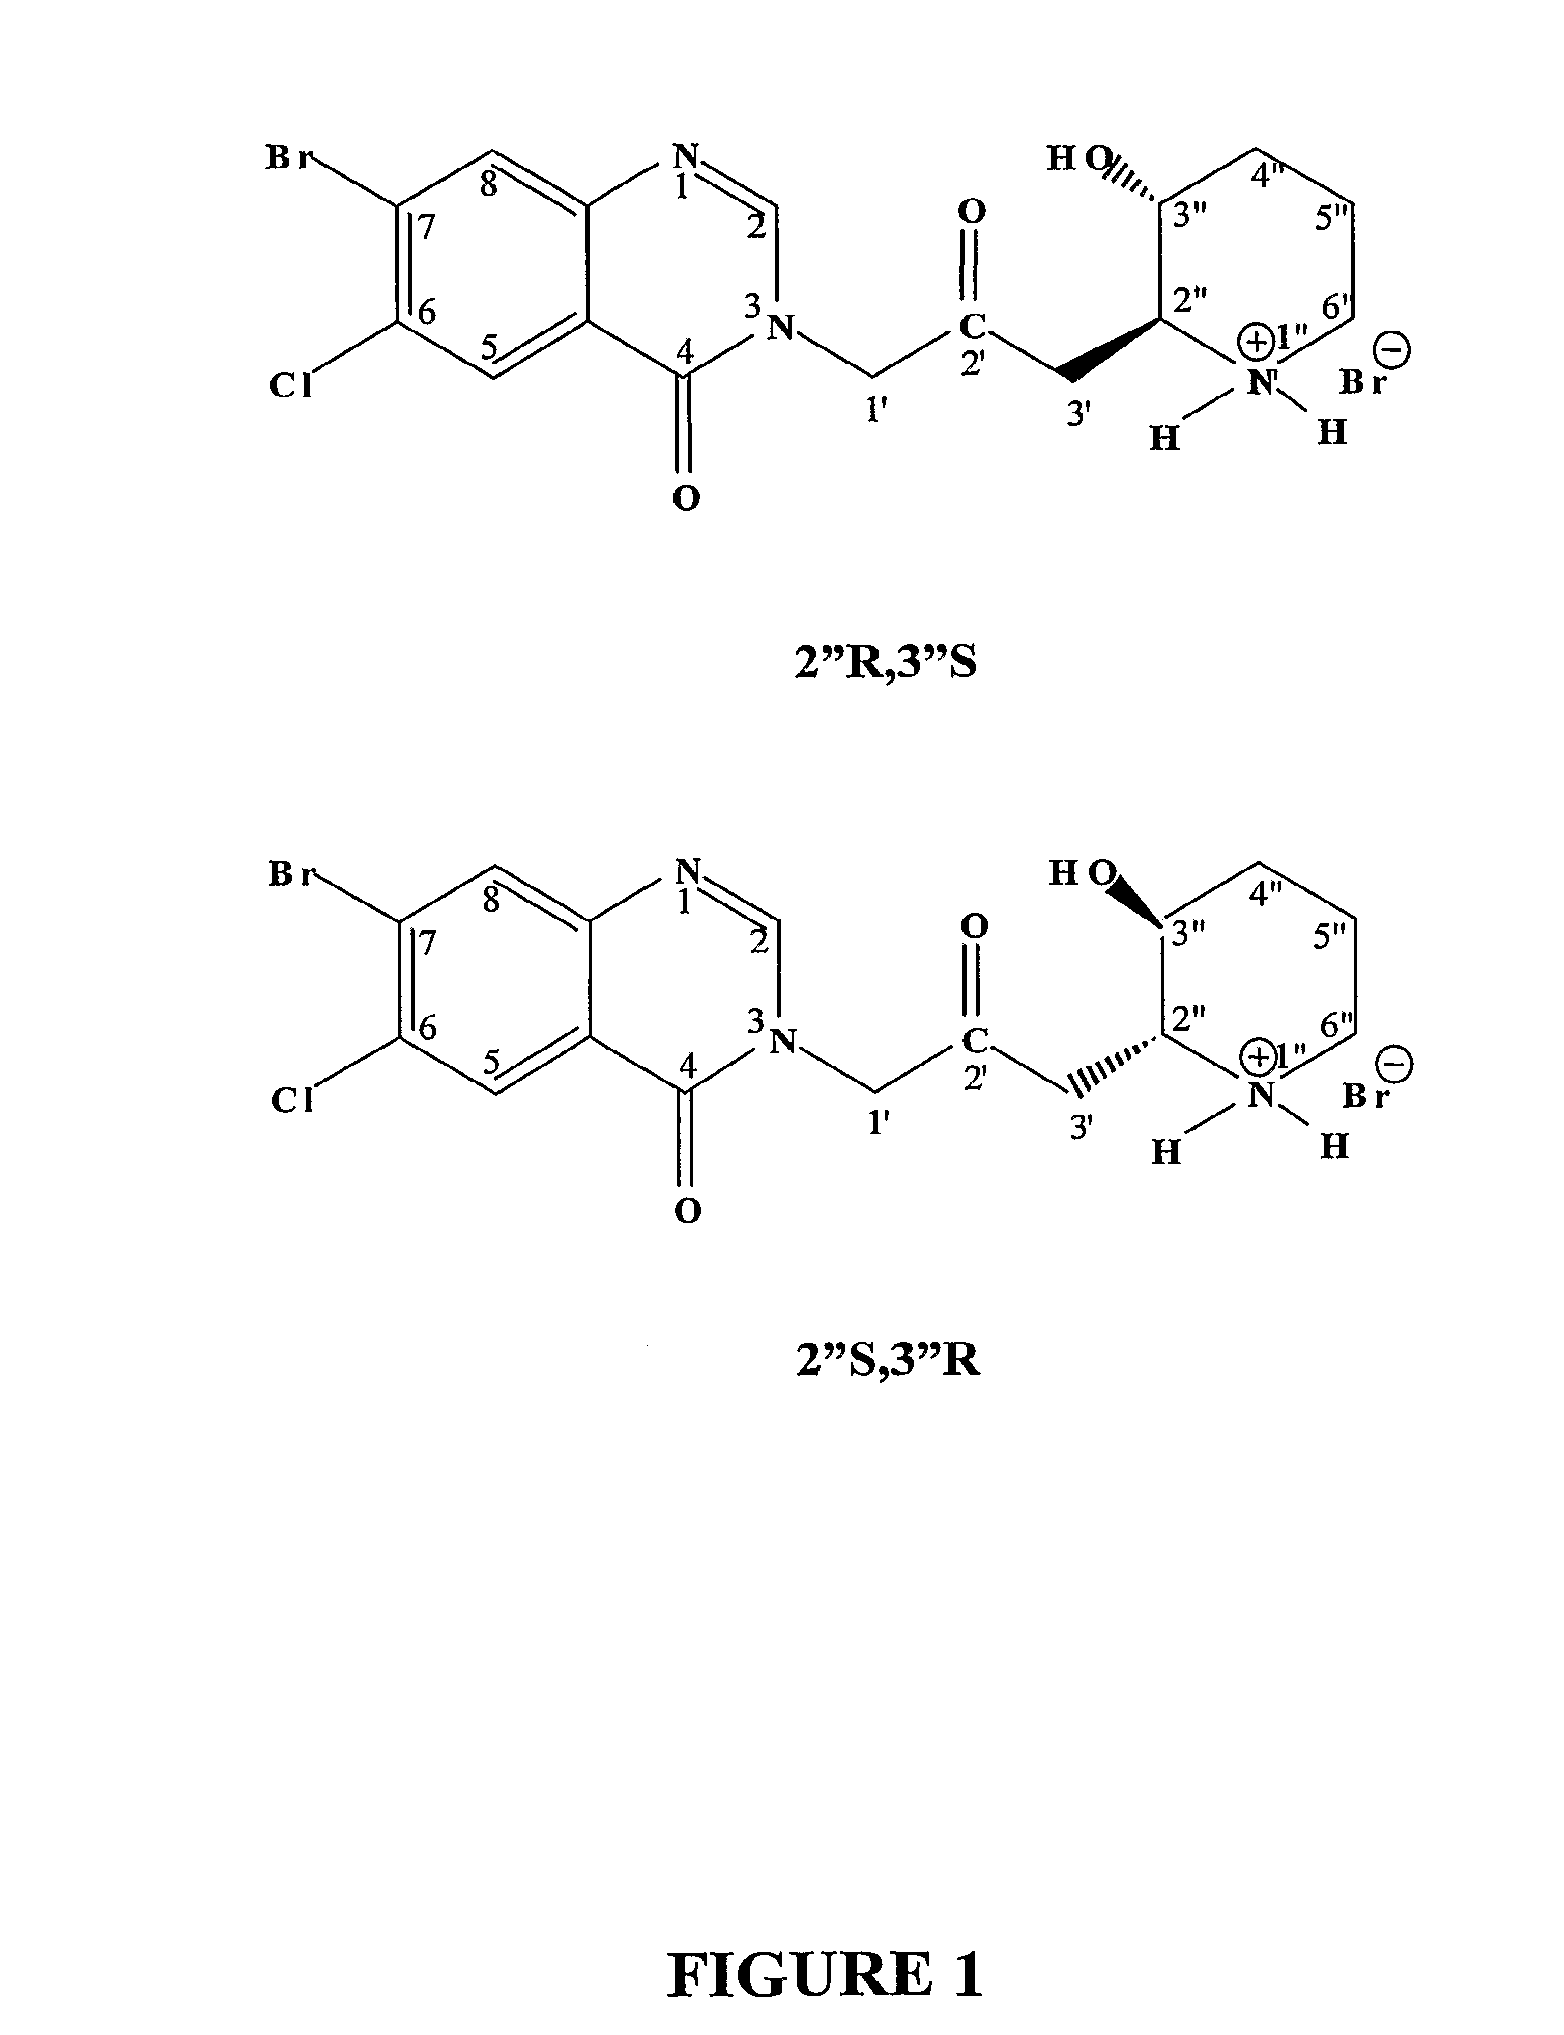 Pharmaceutical compositions of the isolated d-enantiomer of the quinazolinone derivative halofuginone